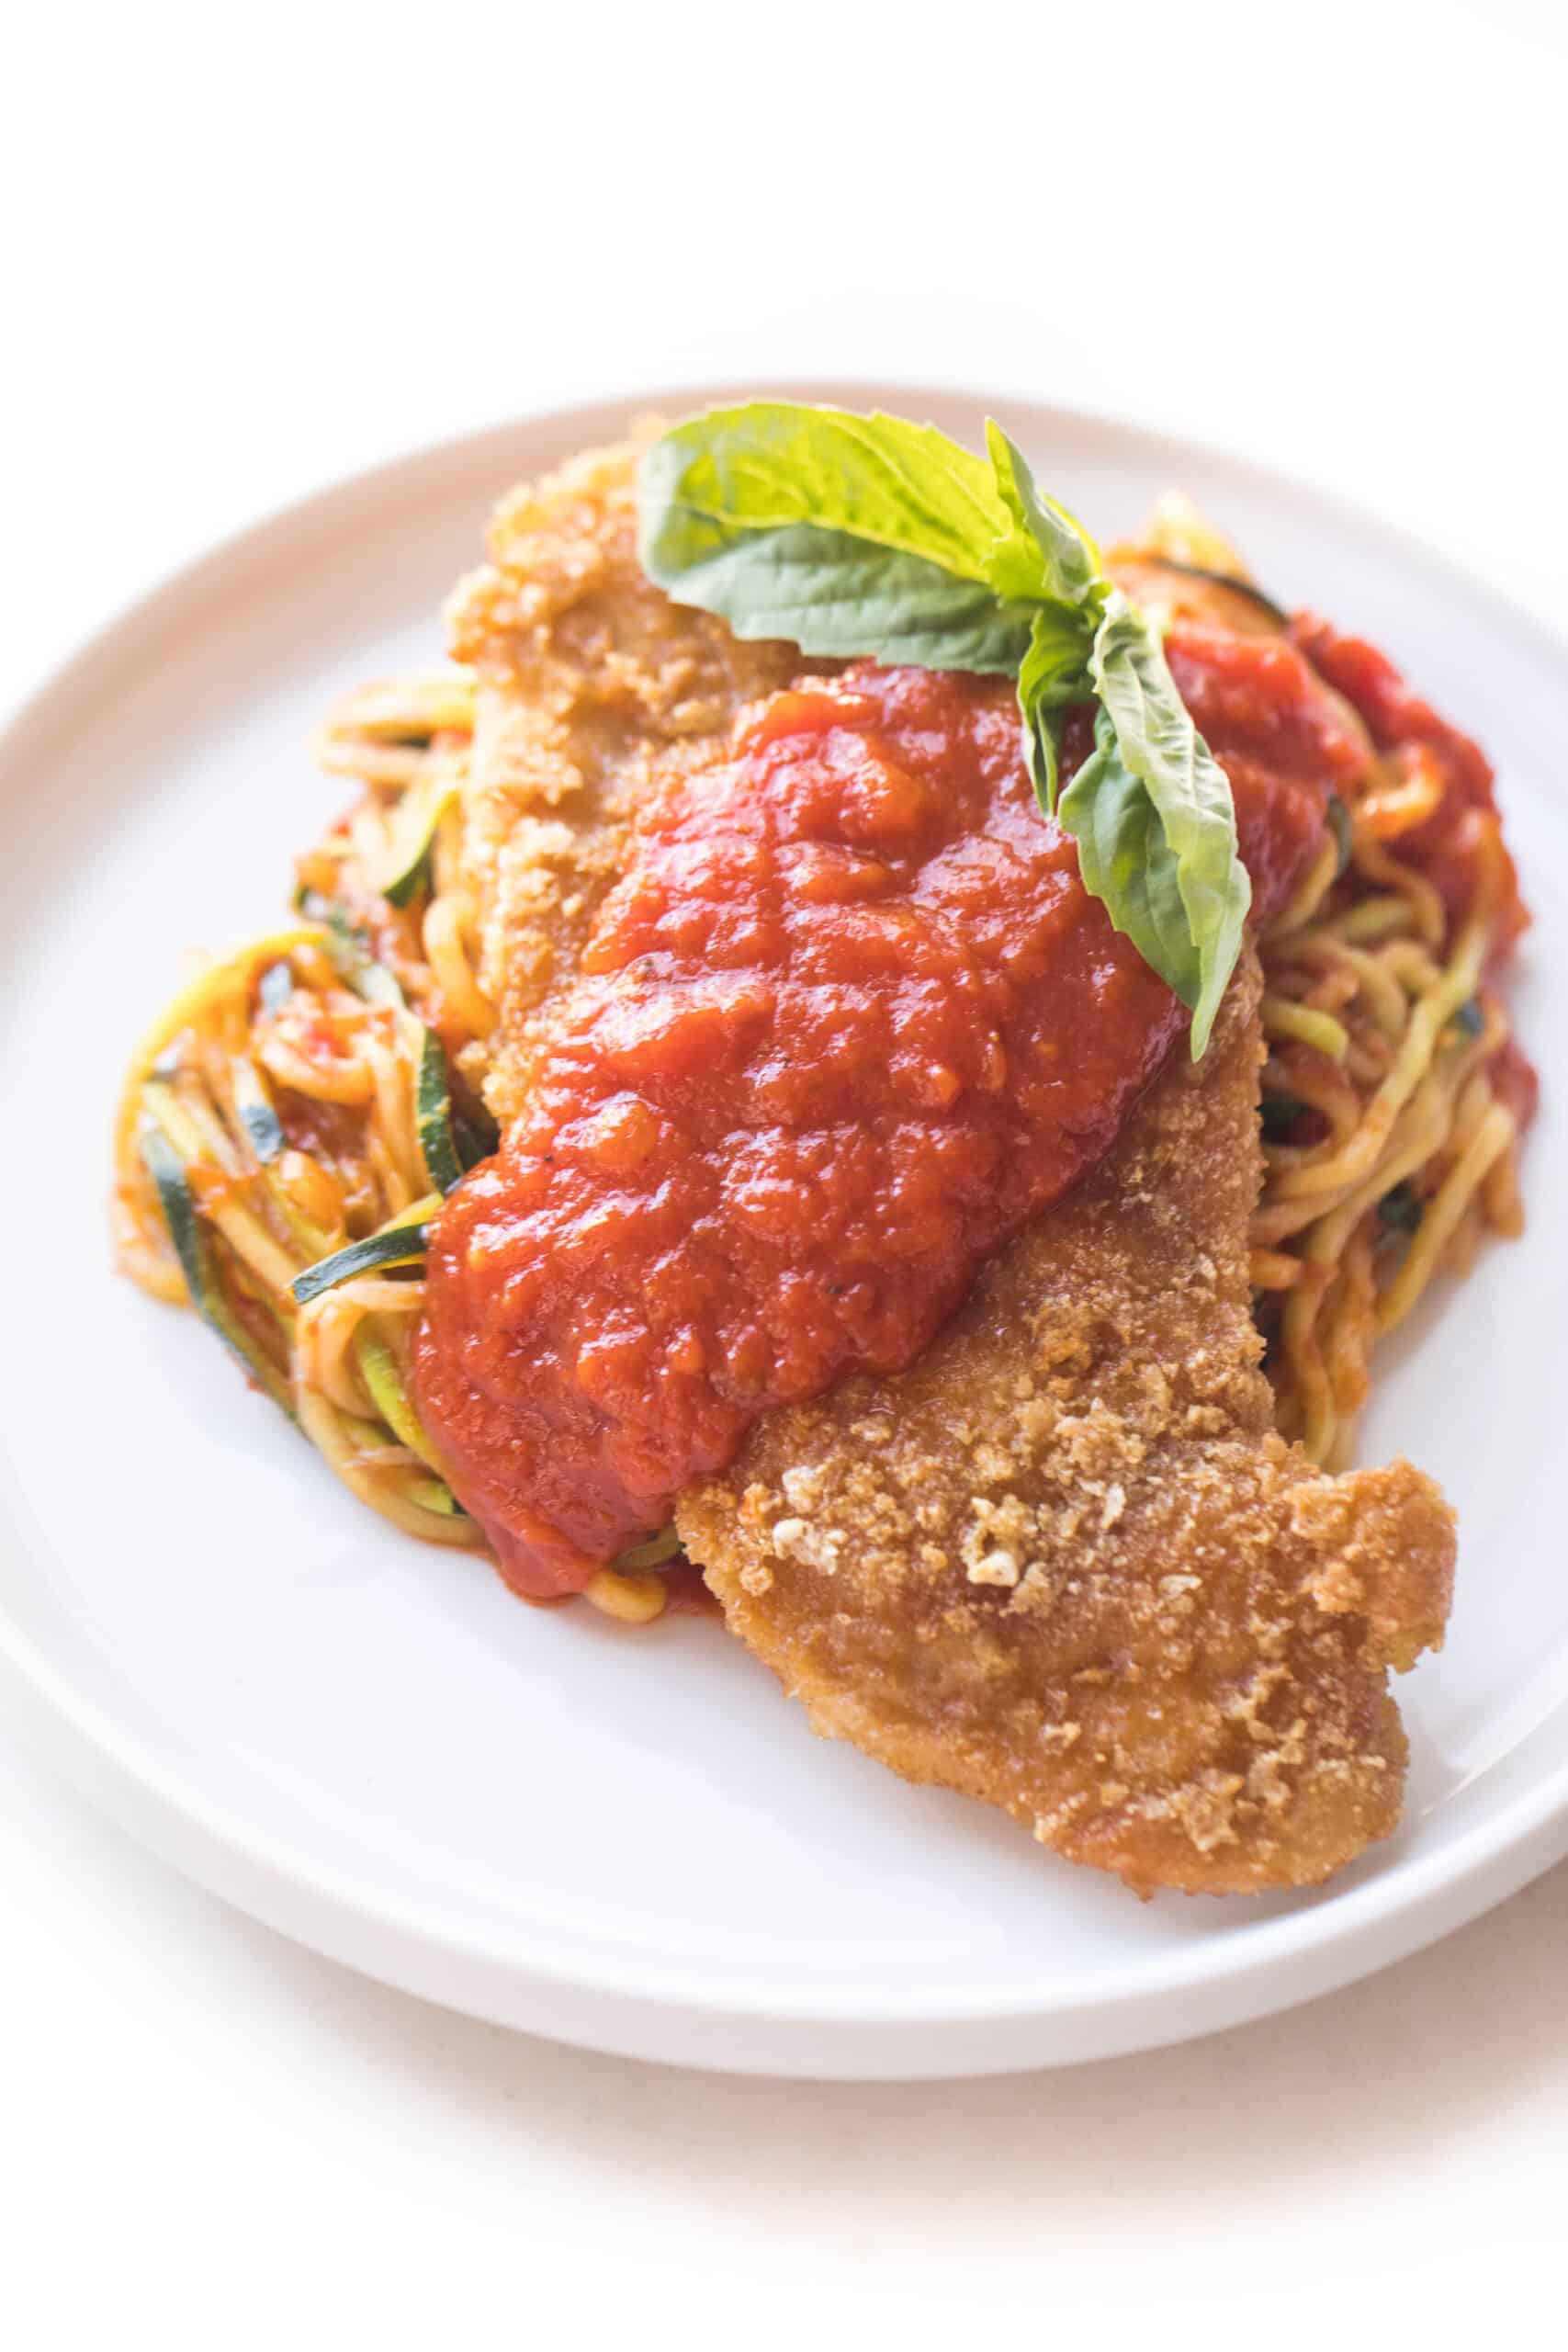 chicken parmesan topped with marinara sauce over zucchini noodles on a white plate and background